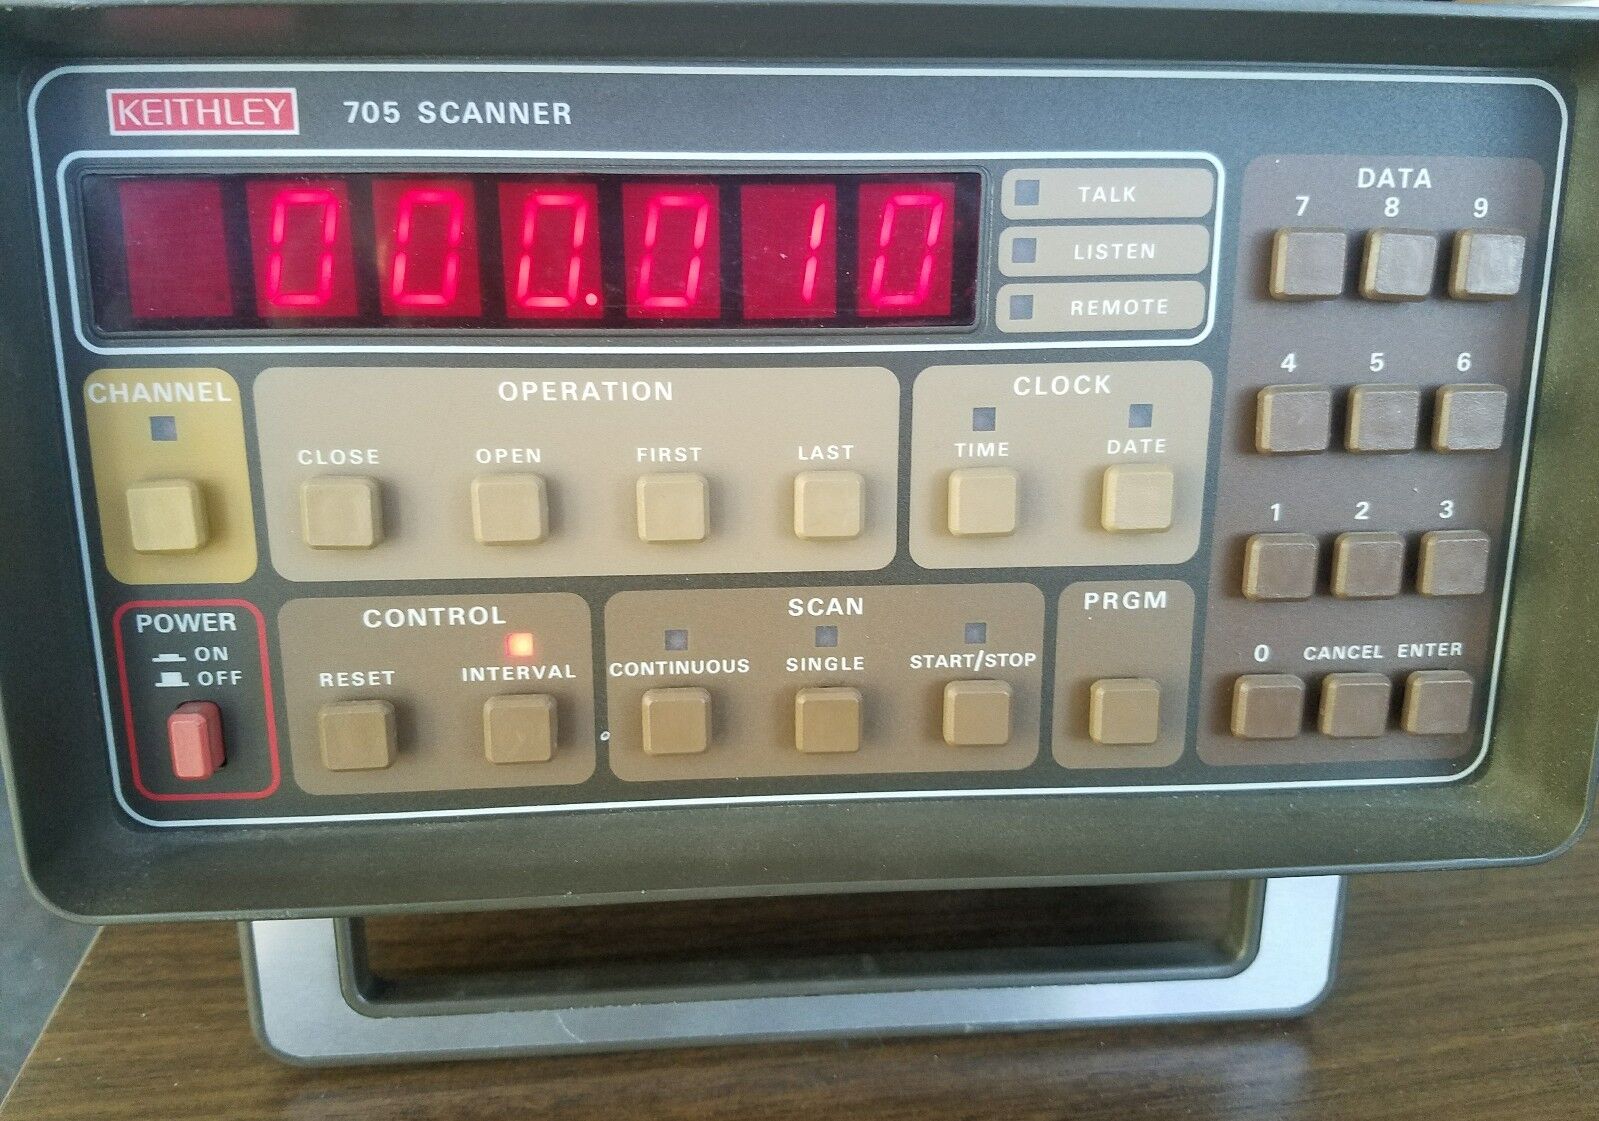 Keithley 705 Scanner